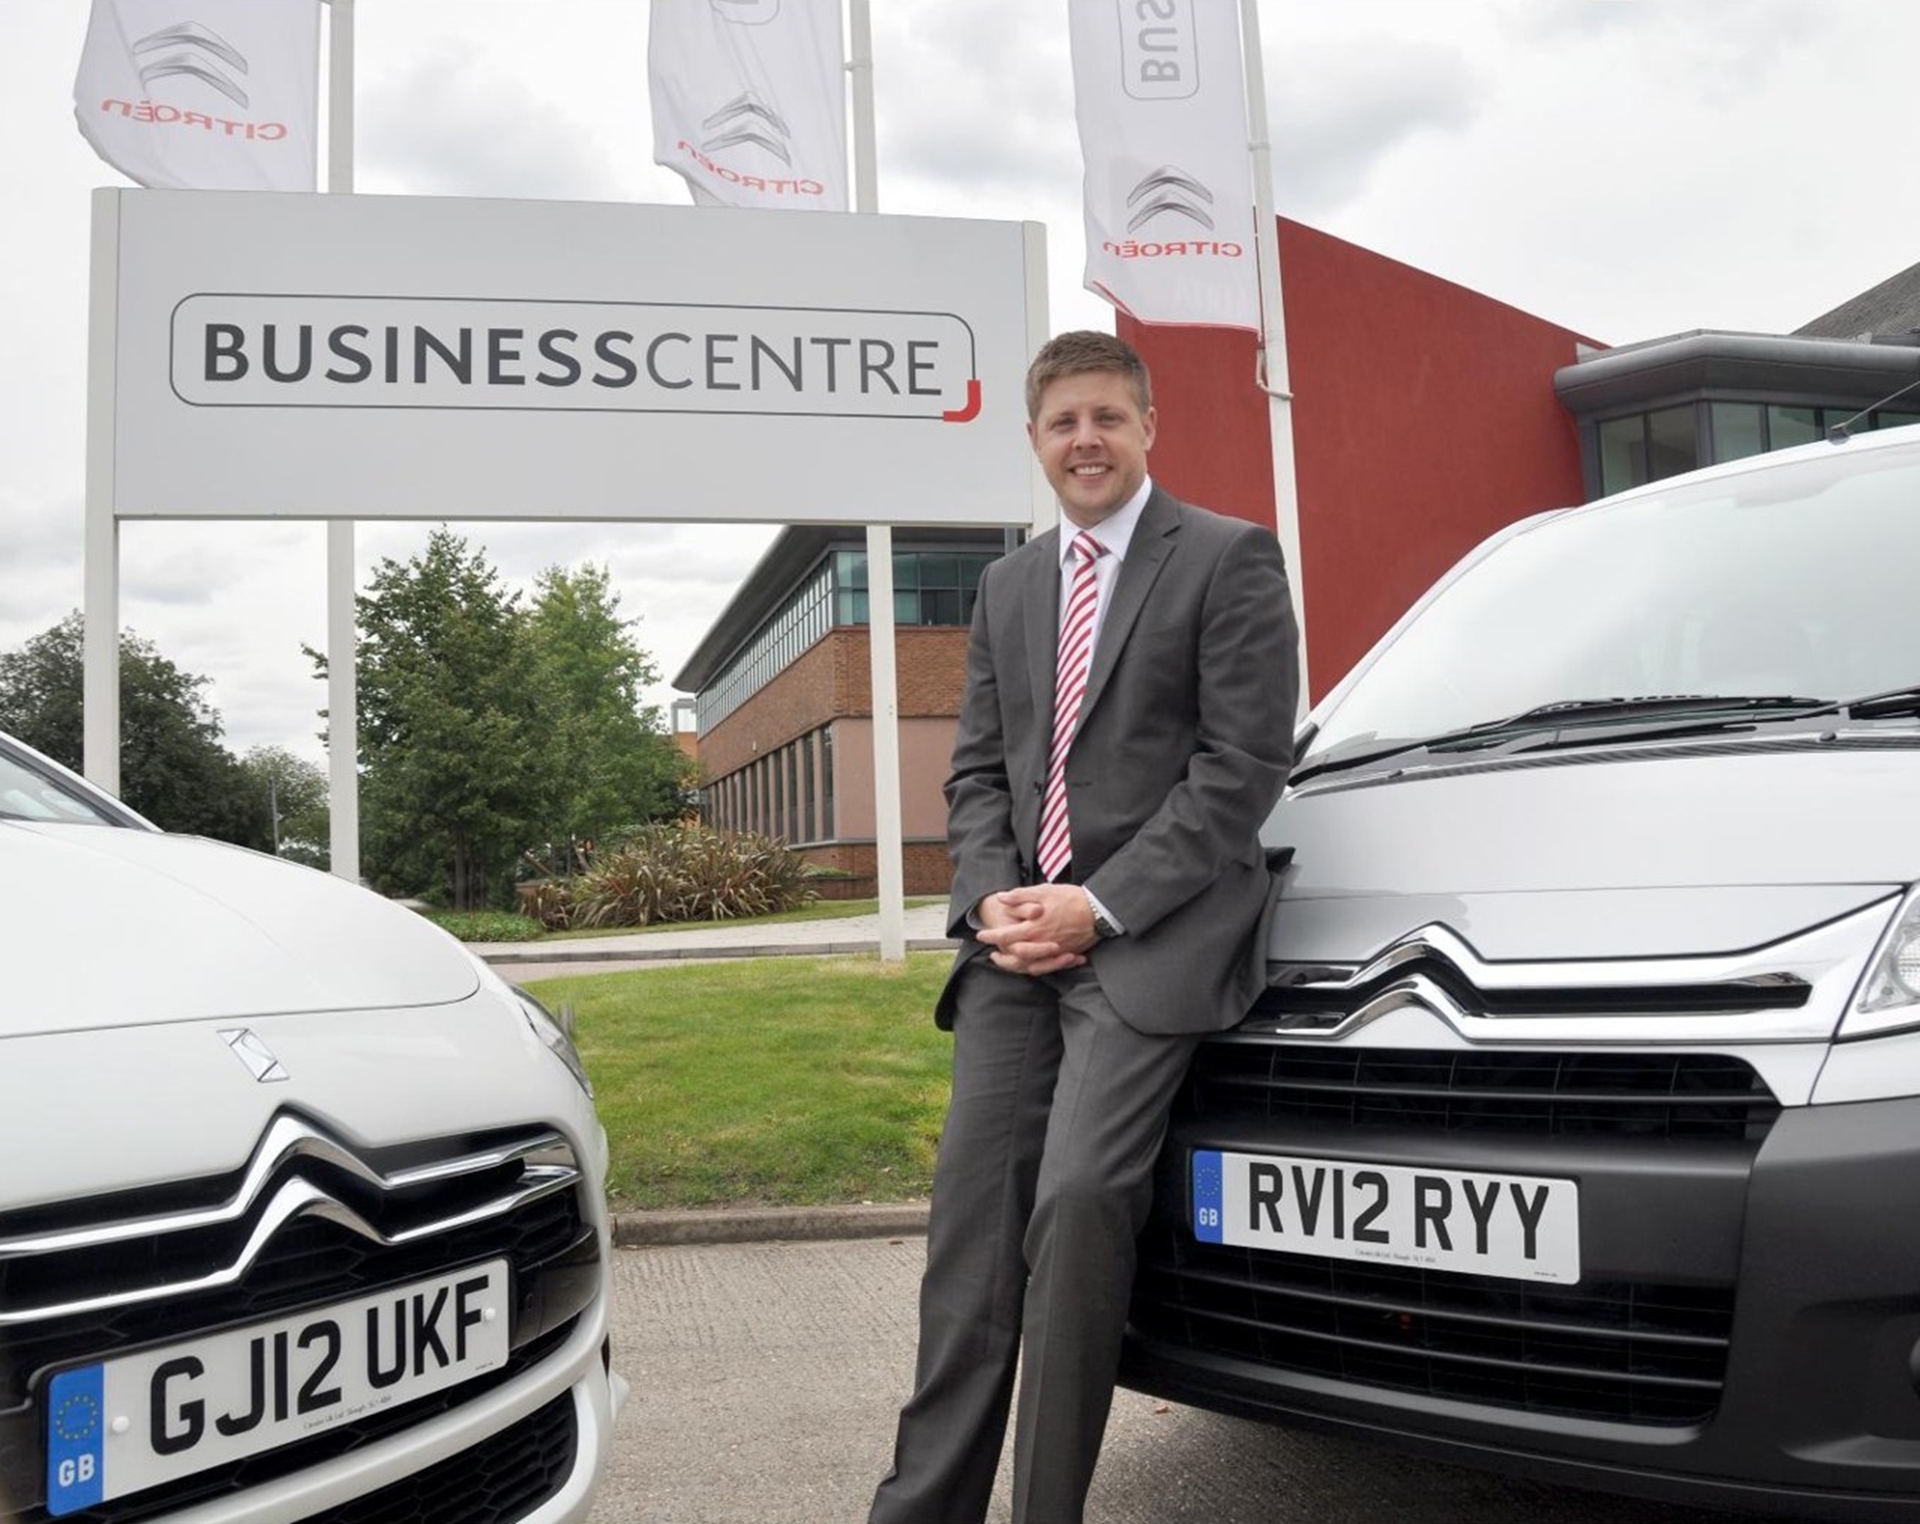 CITROËN APPOINTS NEW HEAD OF COMMERCIAL VEHICLES & BUSINESS CENTRE PROGRAMME